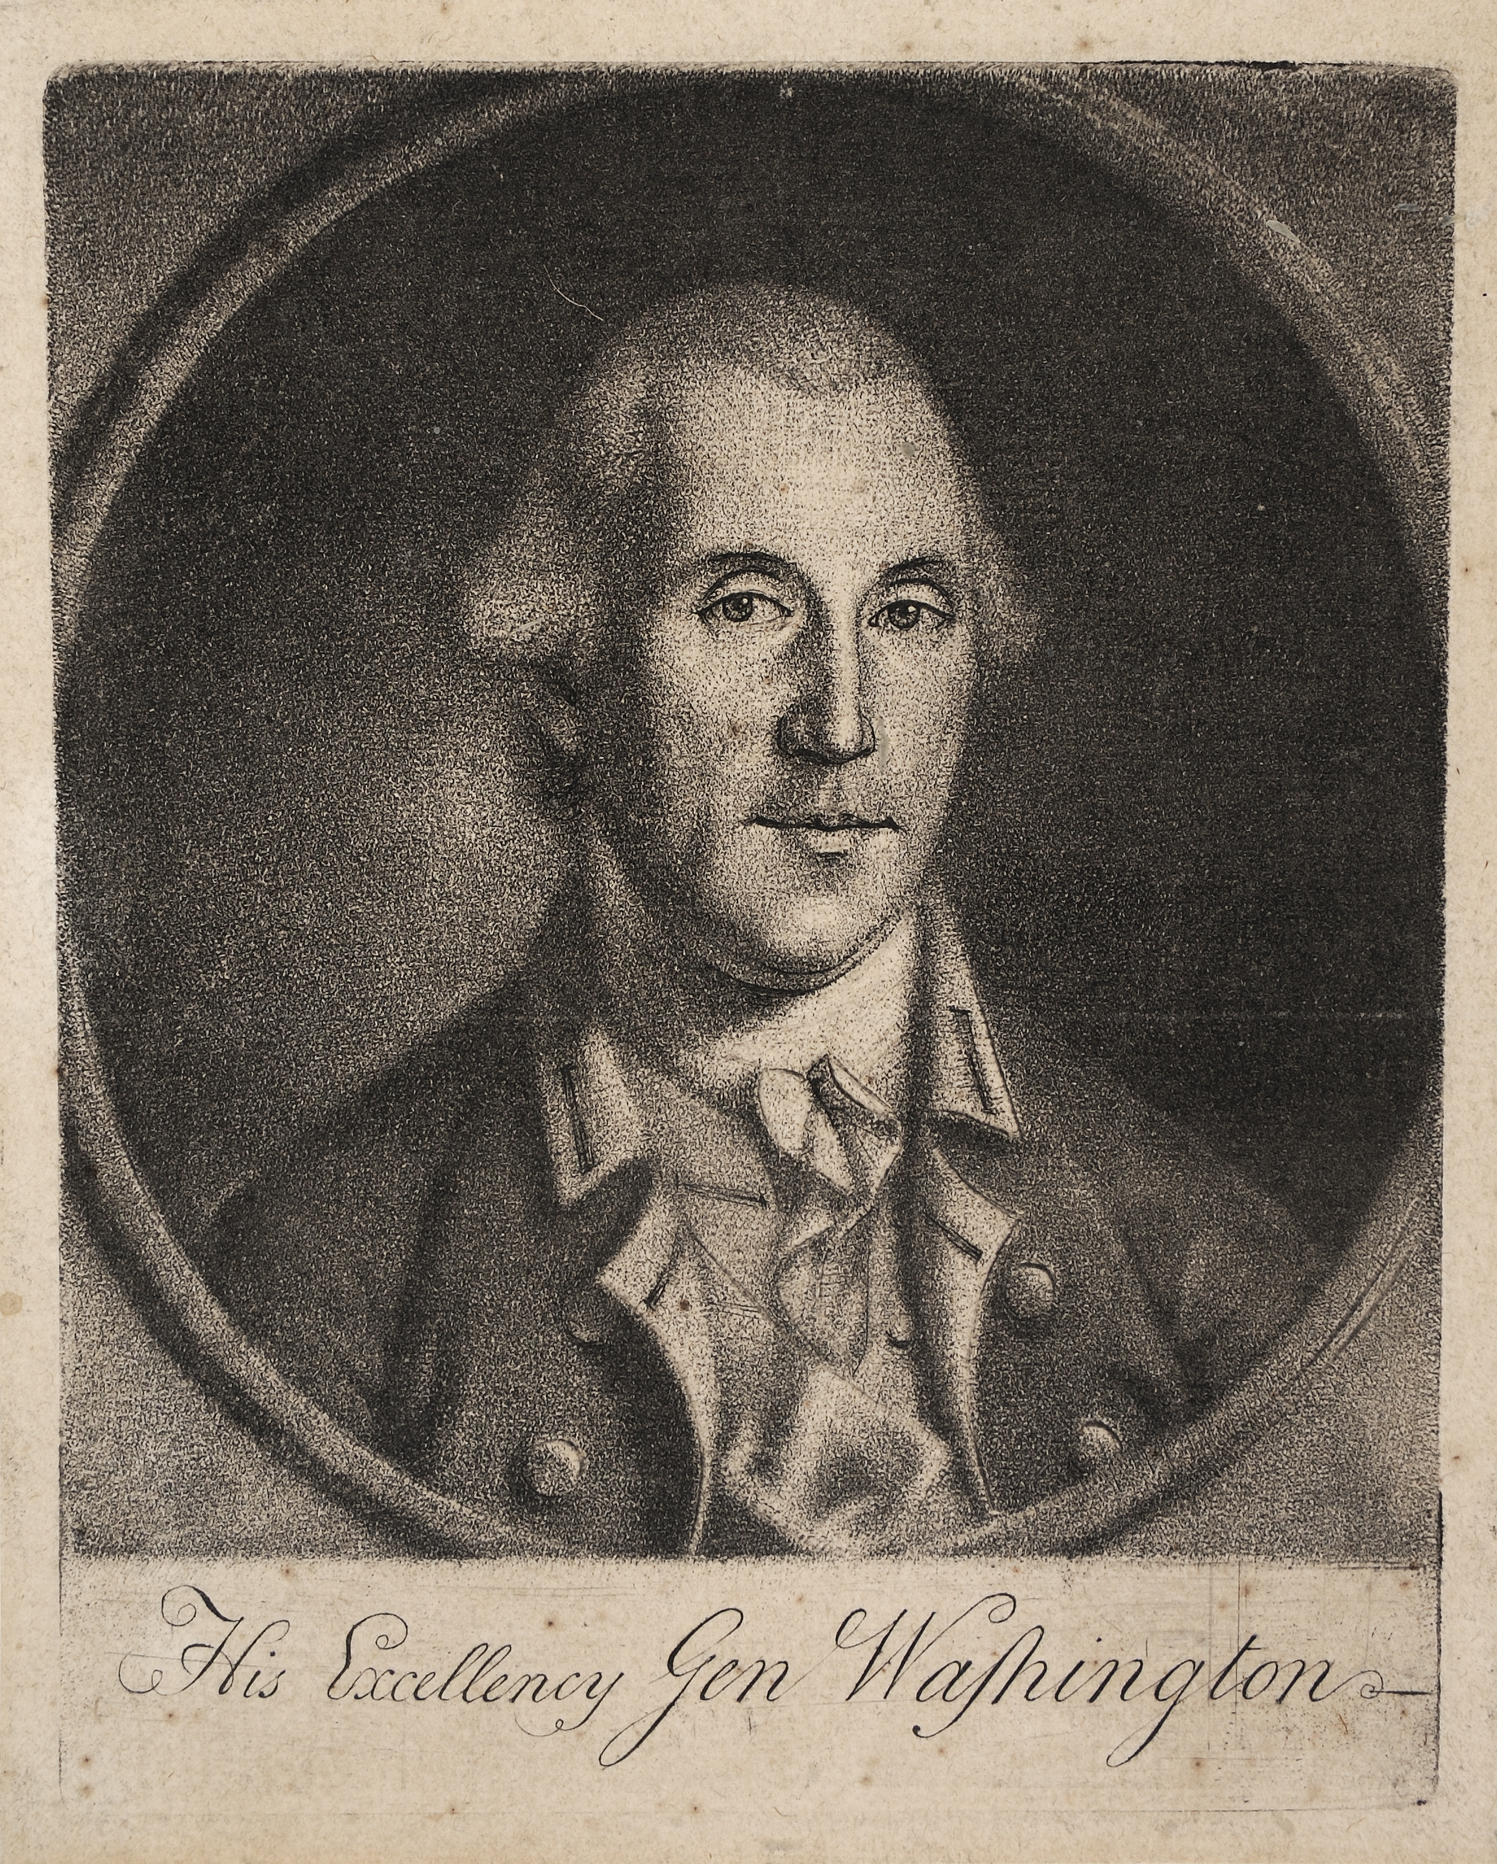 His Excellency Gen Washington by Charles Willson Peale, 1778.